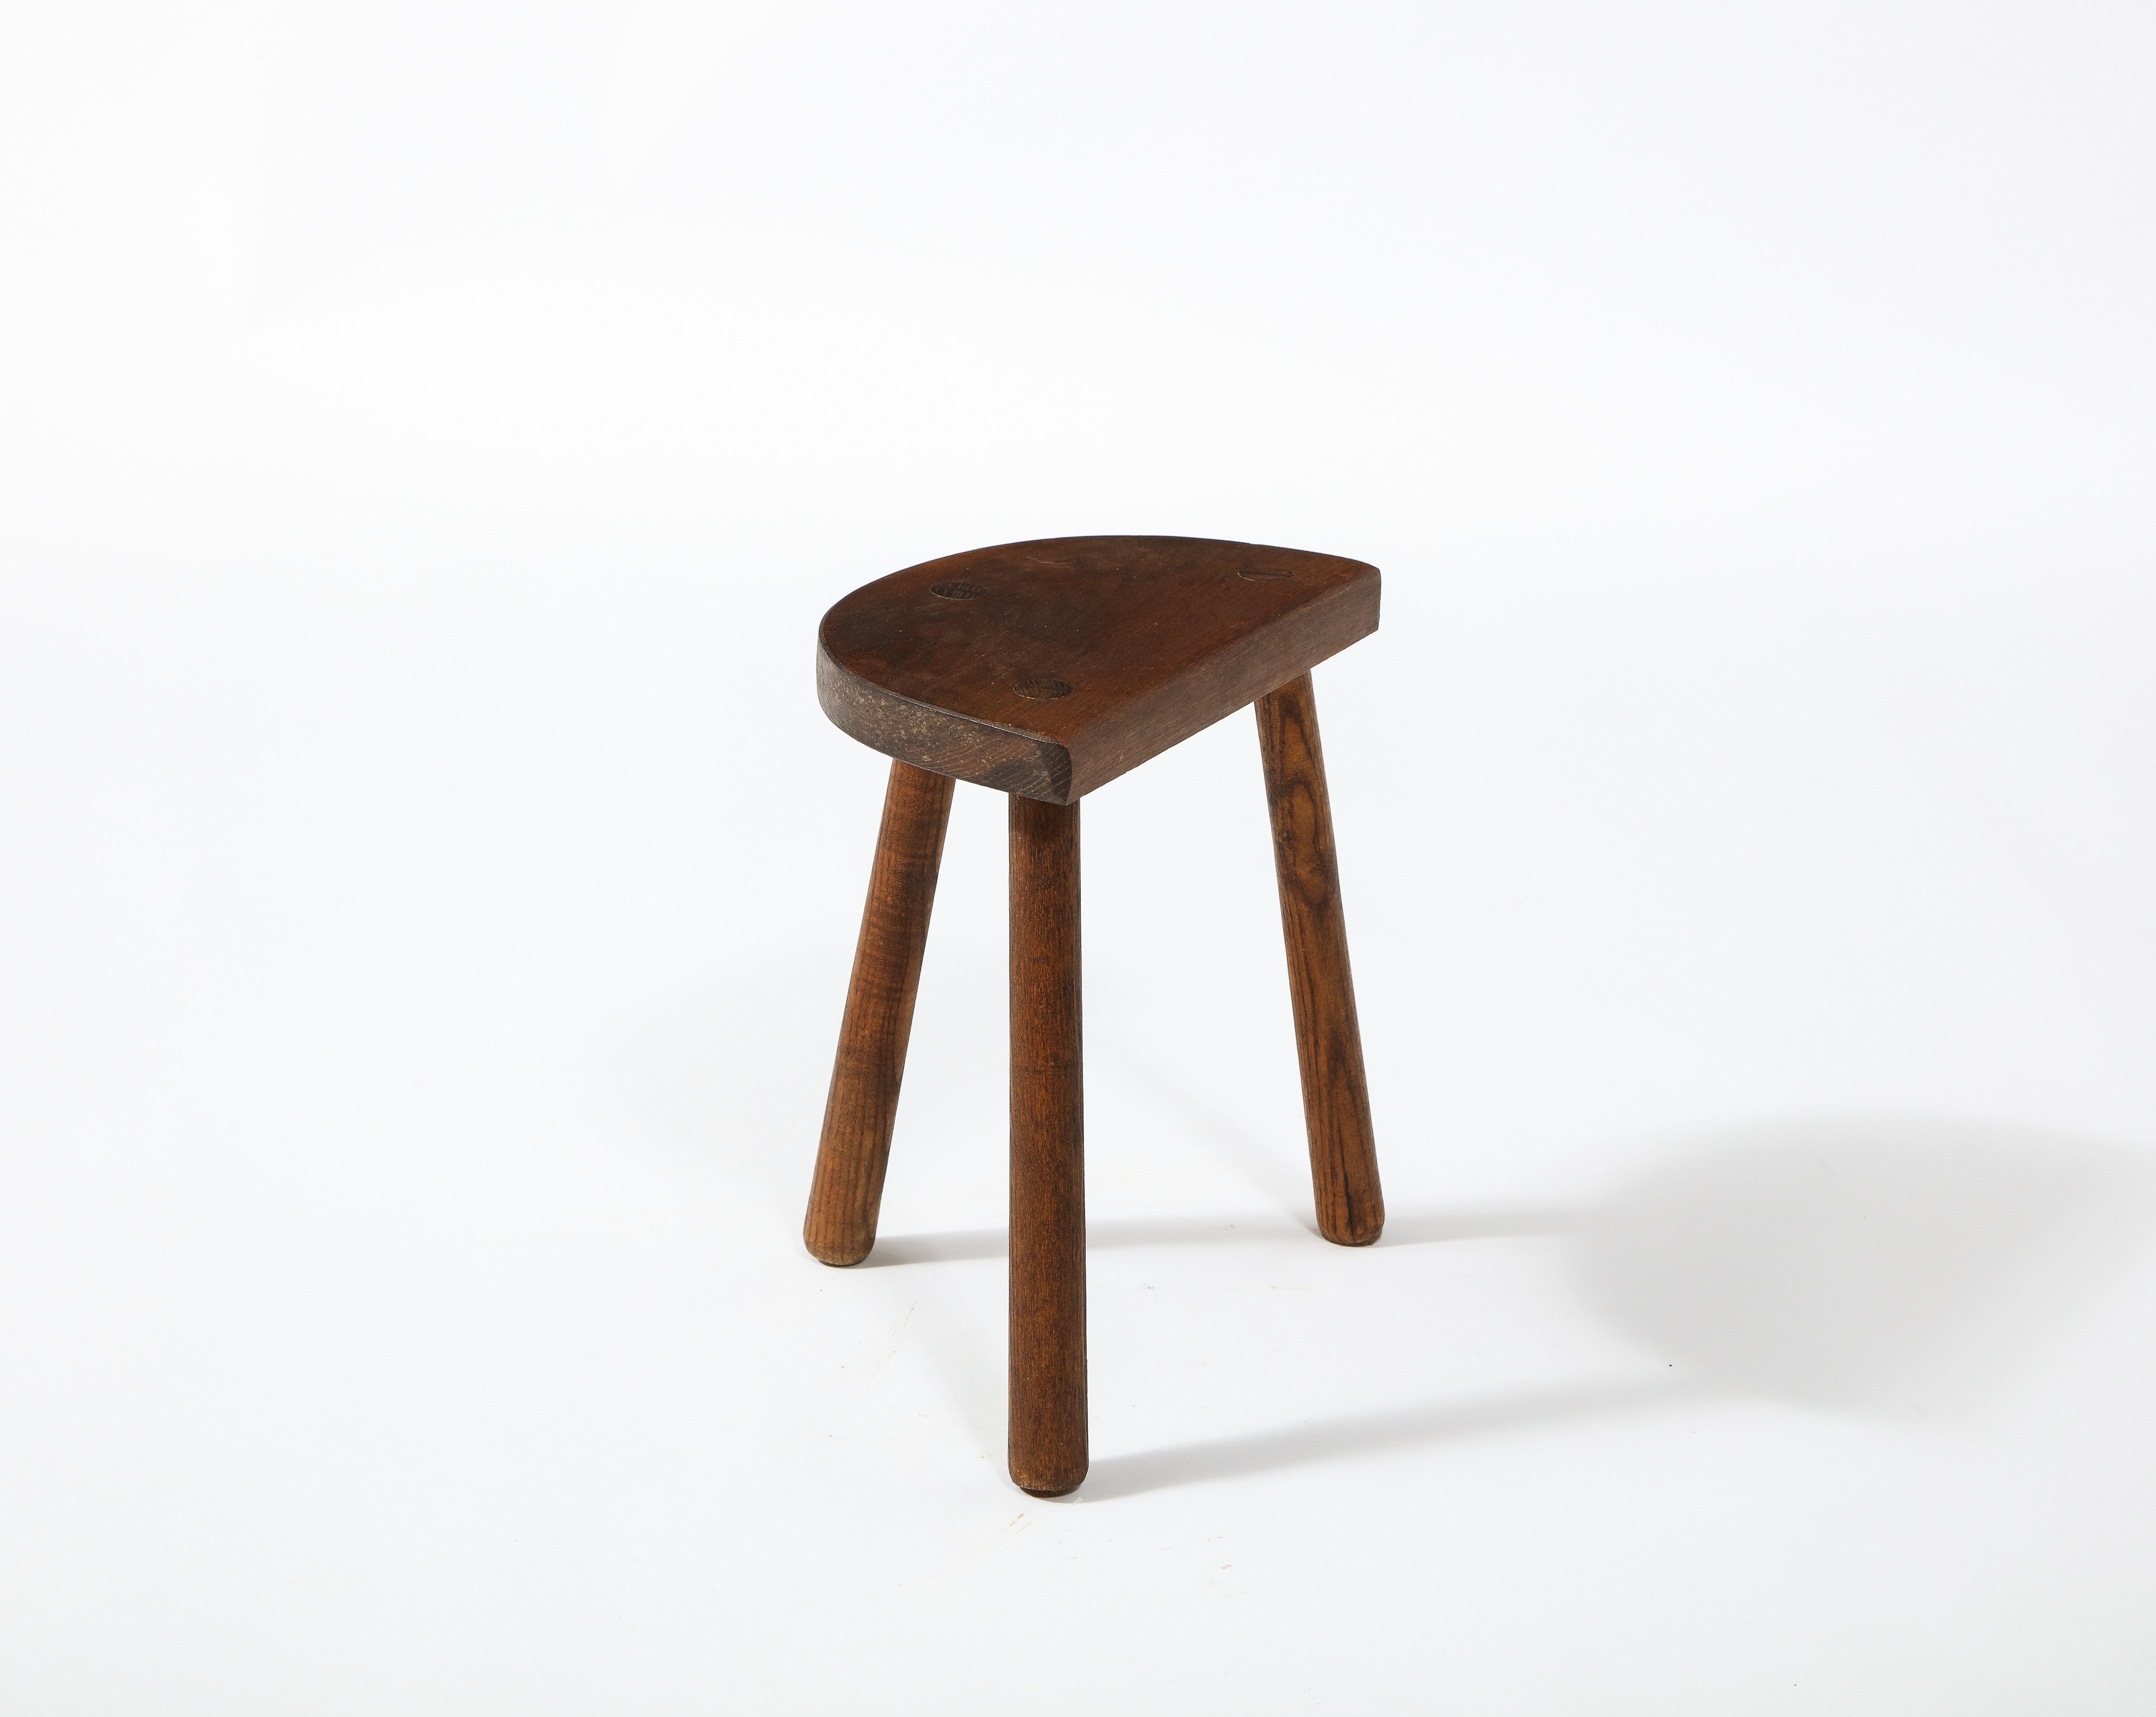 A rustic tripod farm stool with a curved seat.